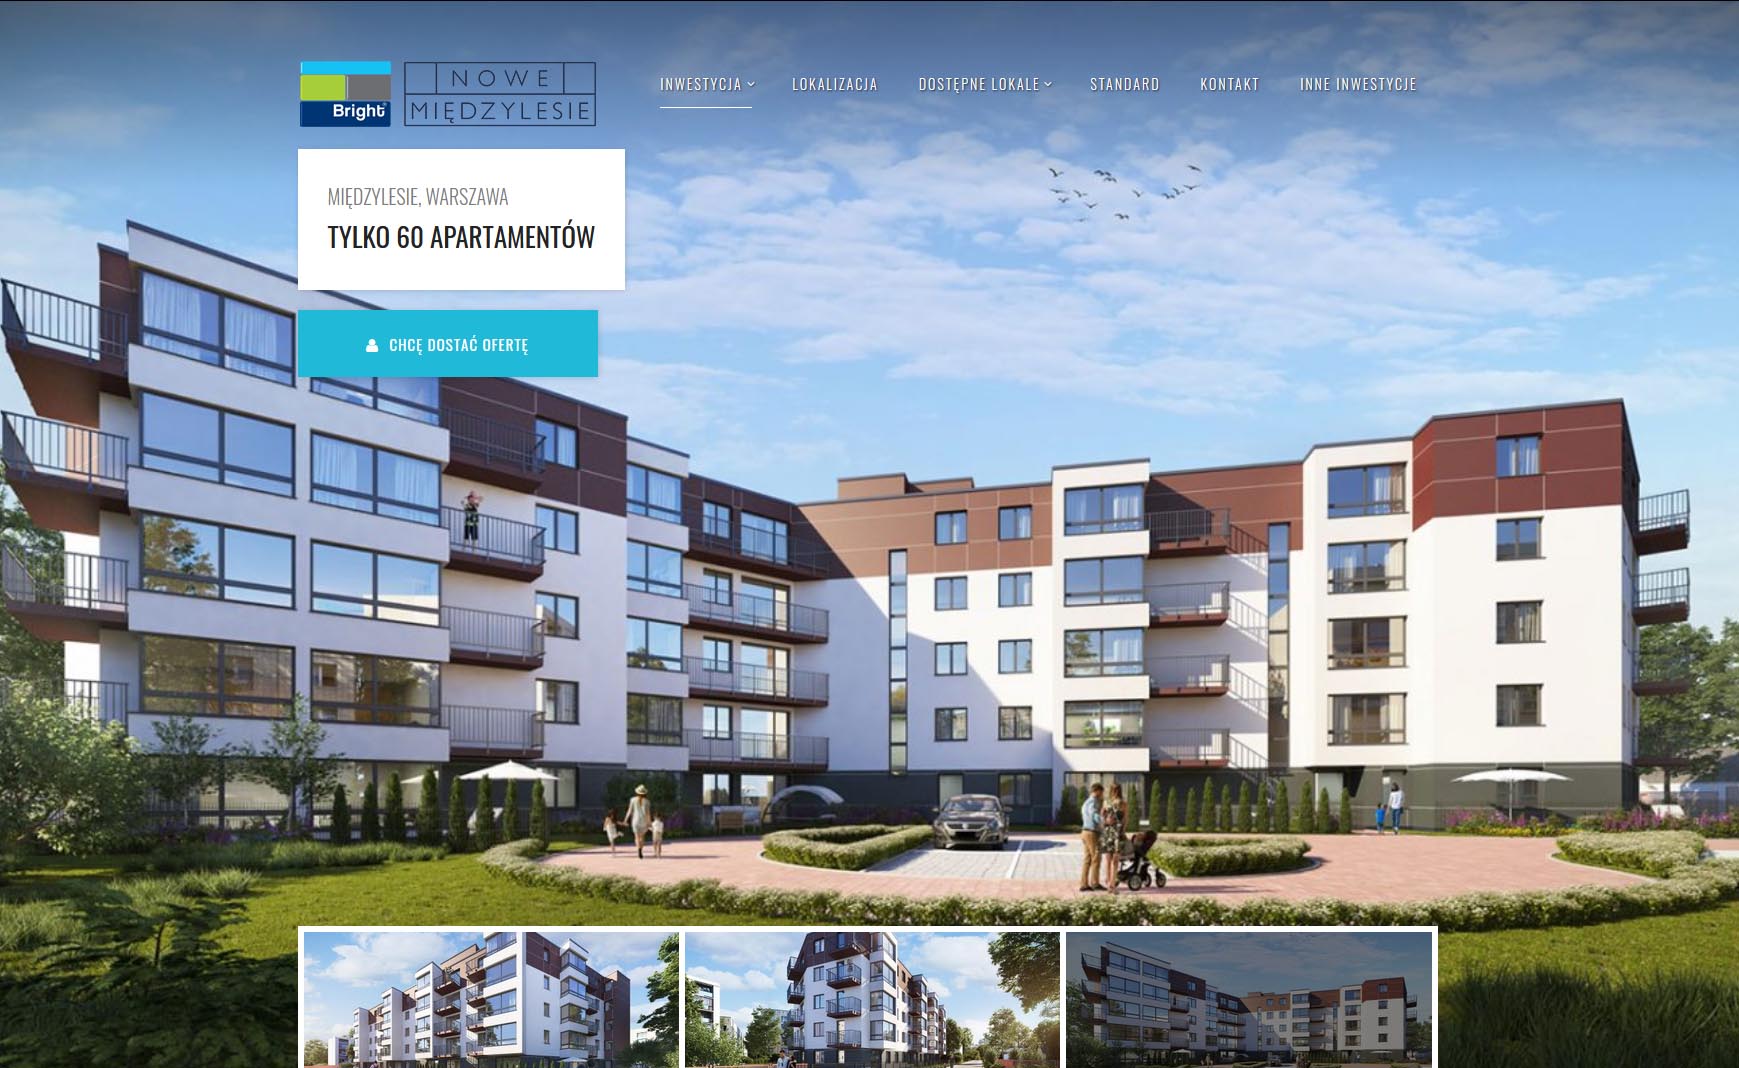 The digital advertising agency Biuro Podróży Reklamy will create a website for Bright Investments, an upcoming residential investment of a developer.